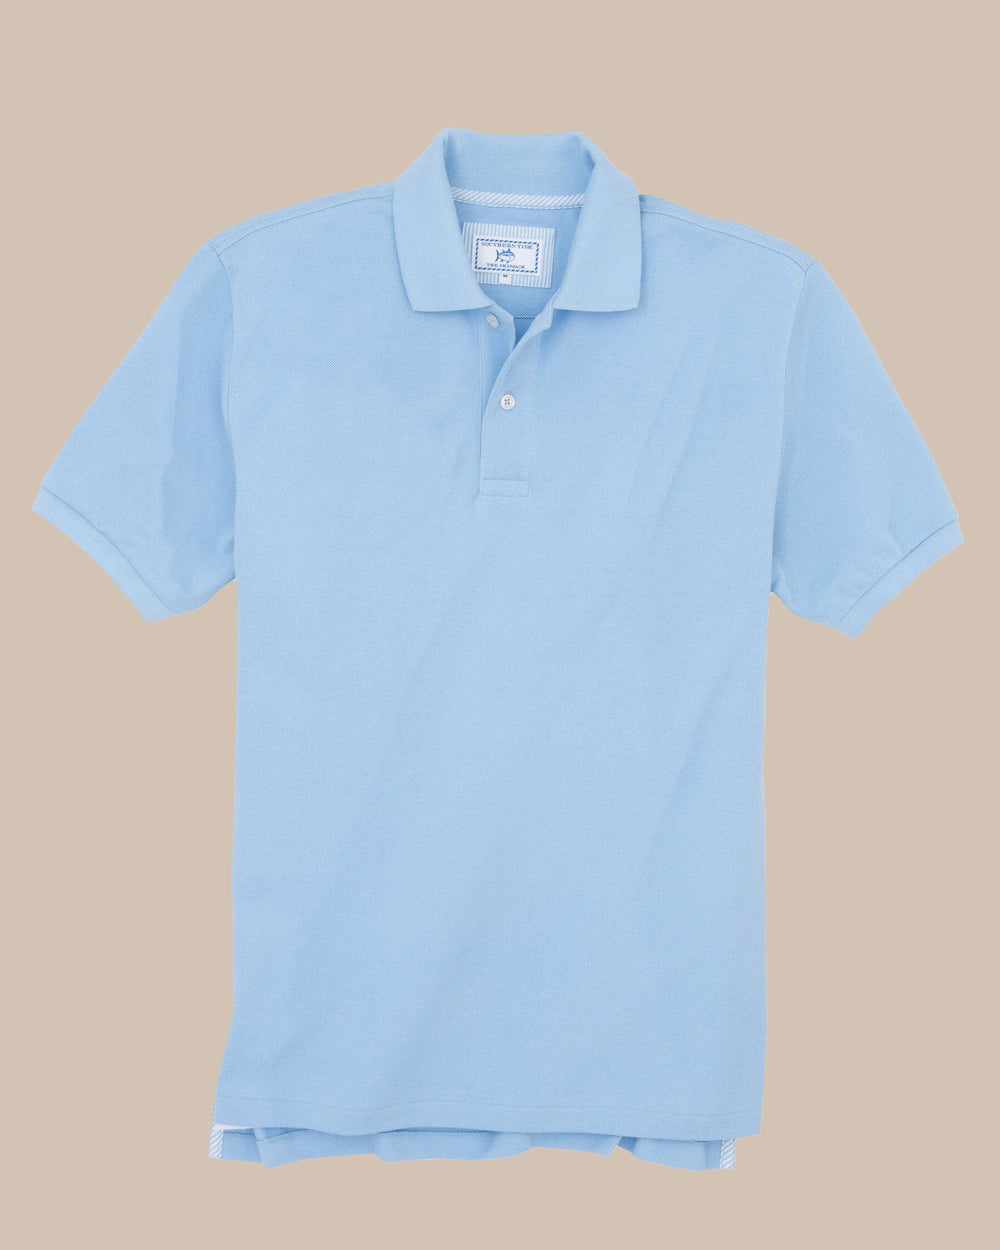 The front view of the Men's Light Blue Skipjack Gameday Colors Polo Shirt by Southern Tide - Tide Blue